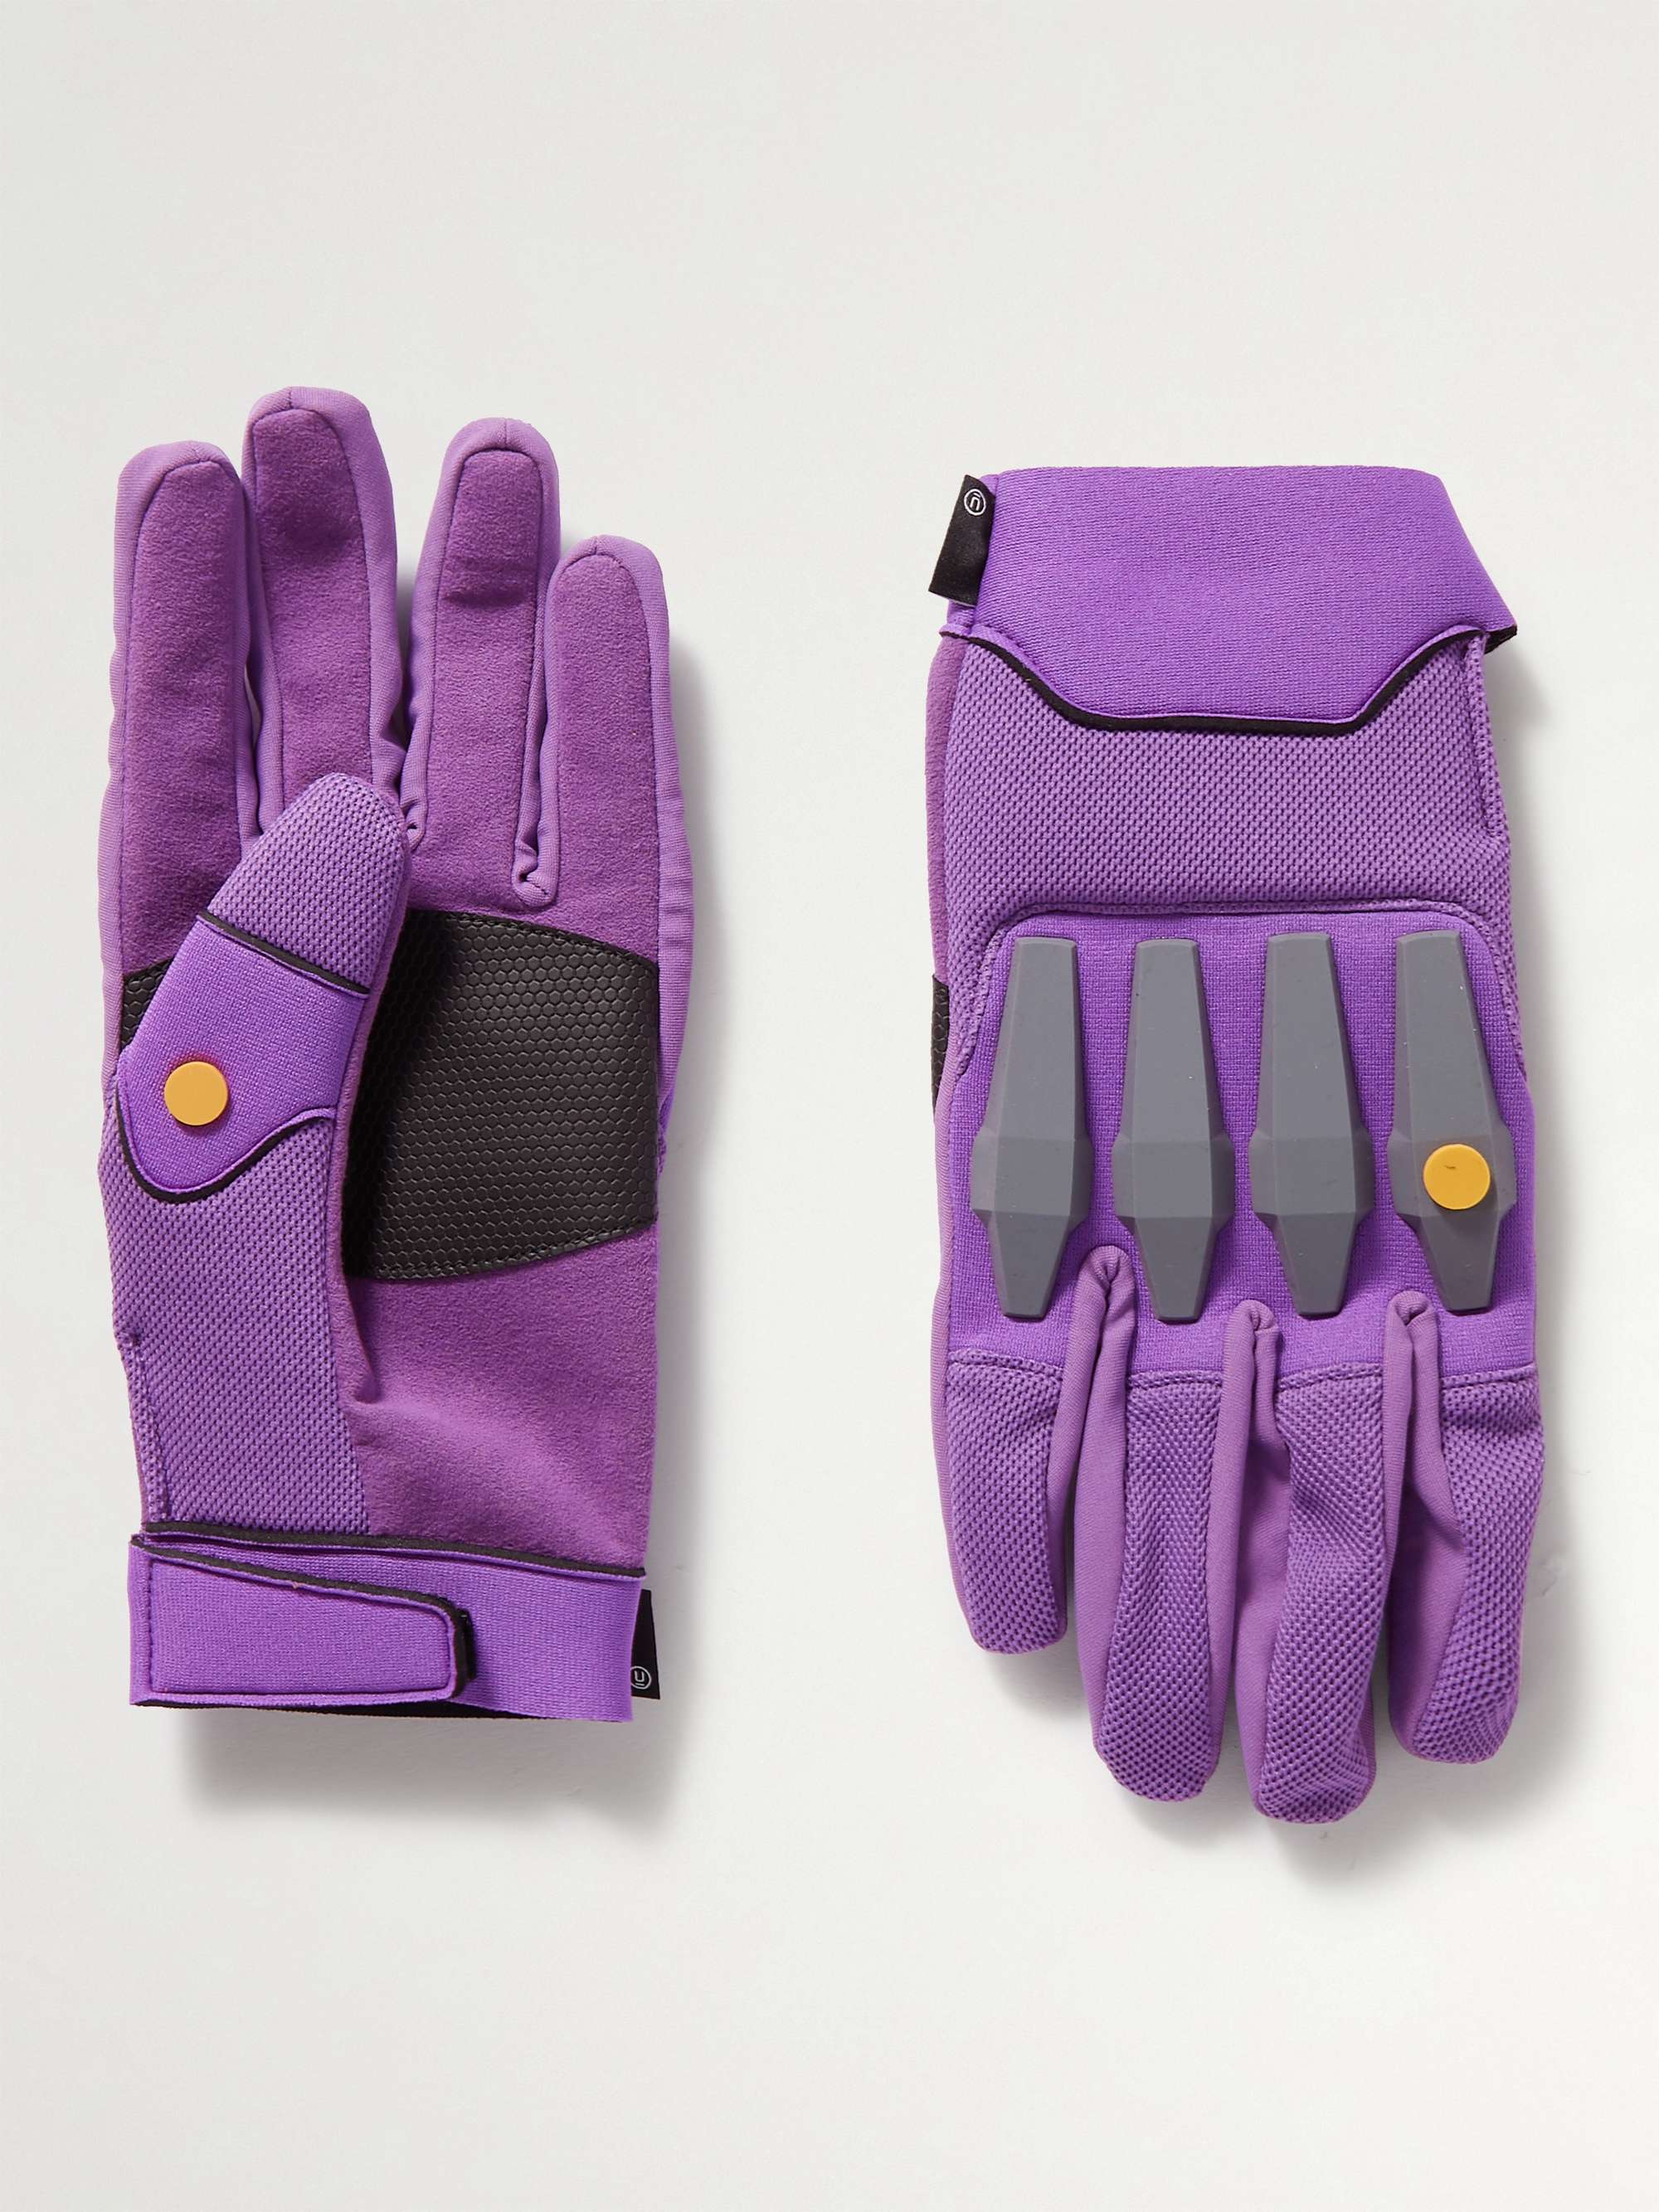 UNDERCOVER + Neon Genesis Evangelion Rubber, Stretch-Knit, Mesh and Faux Suede Gloves